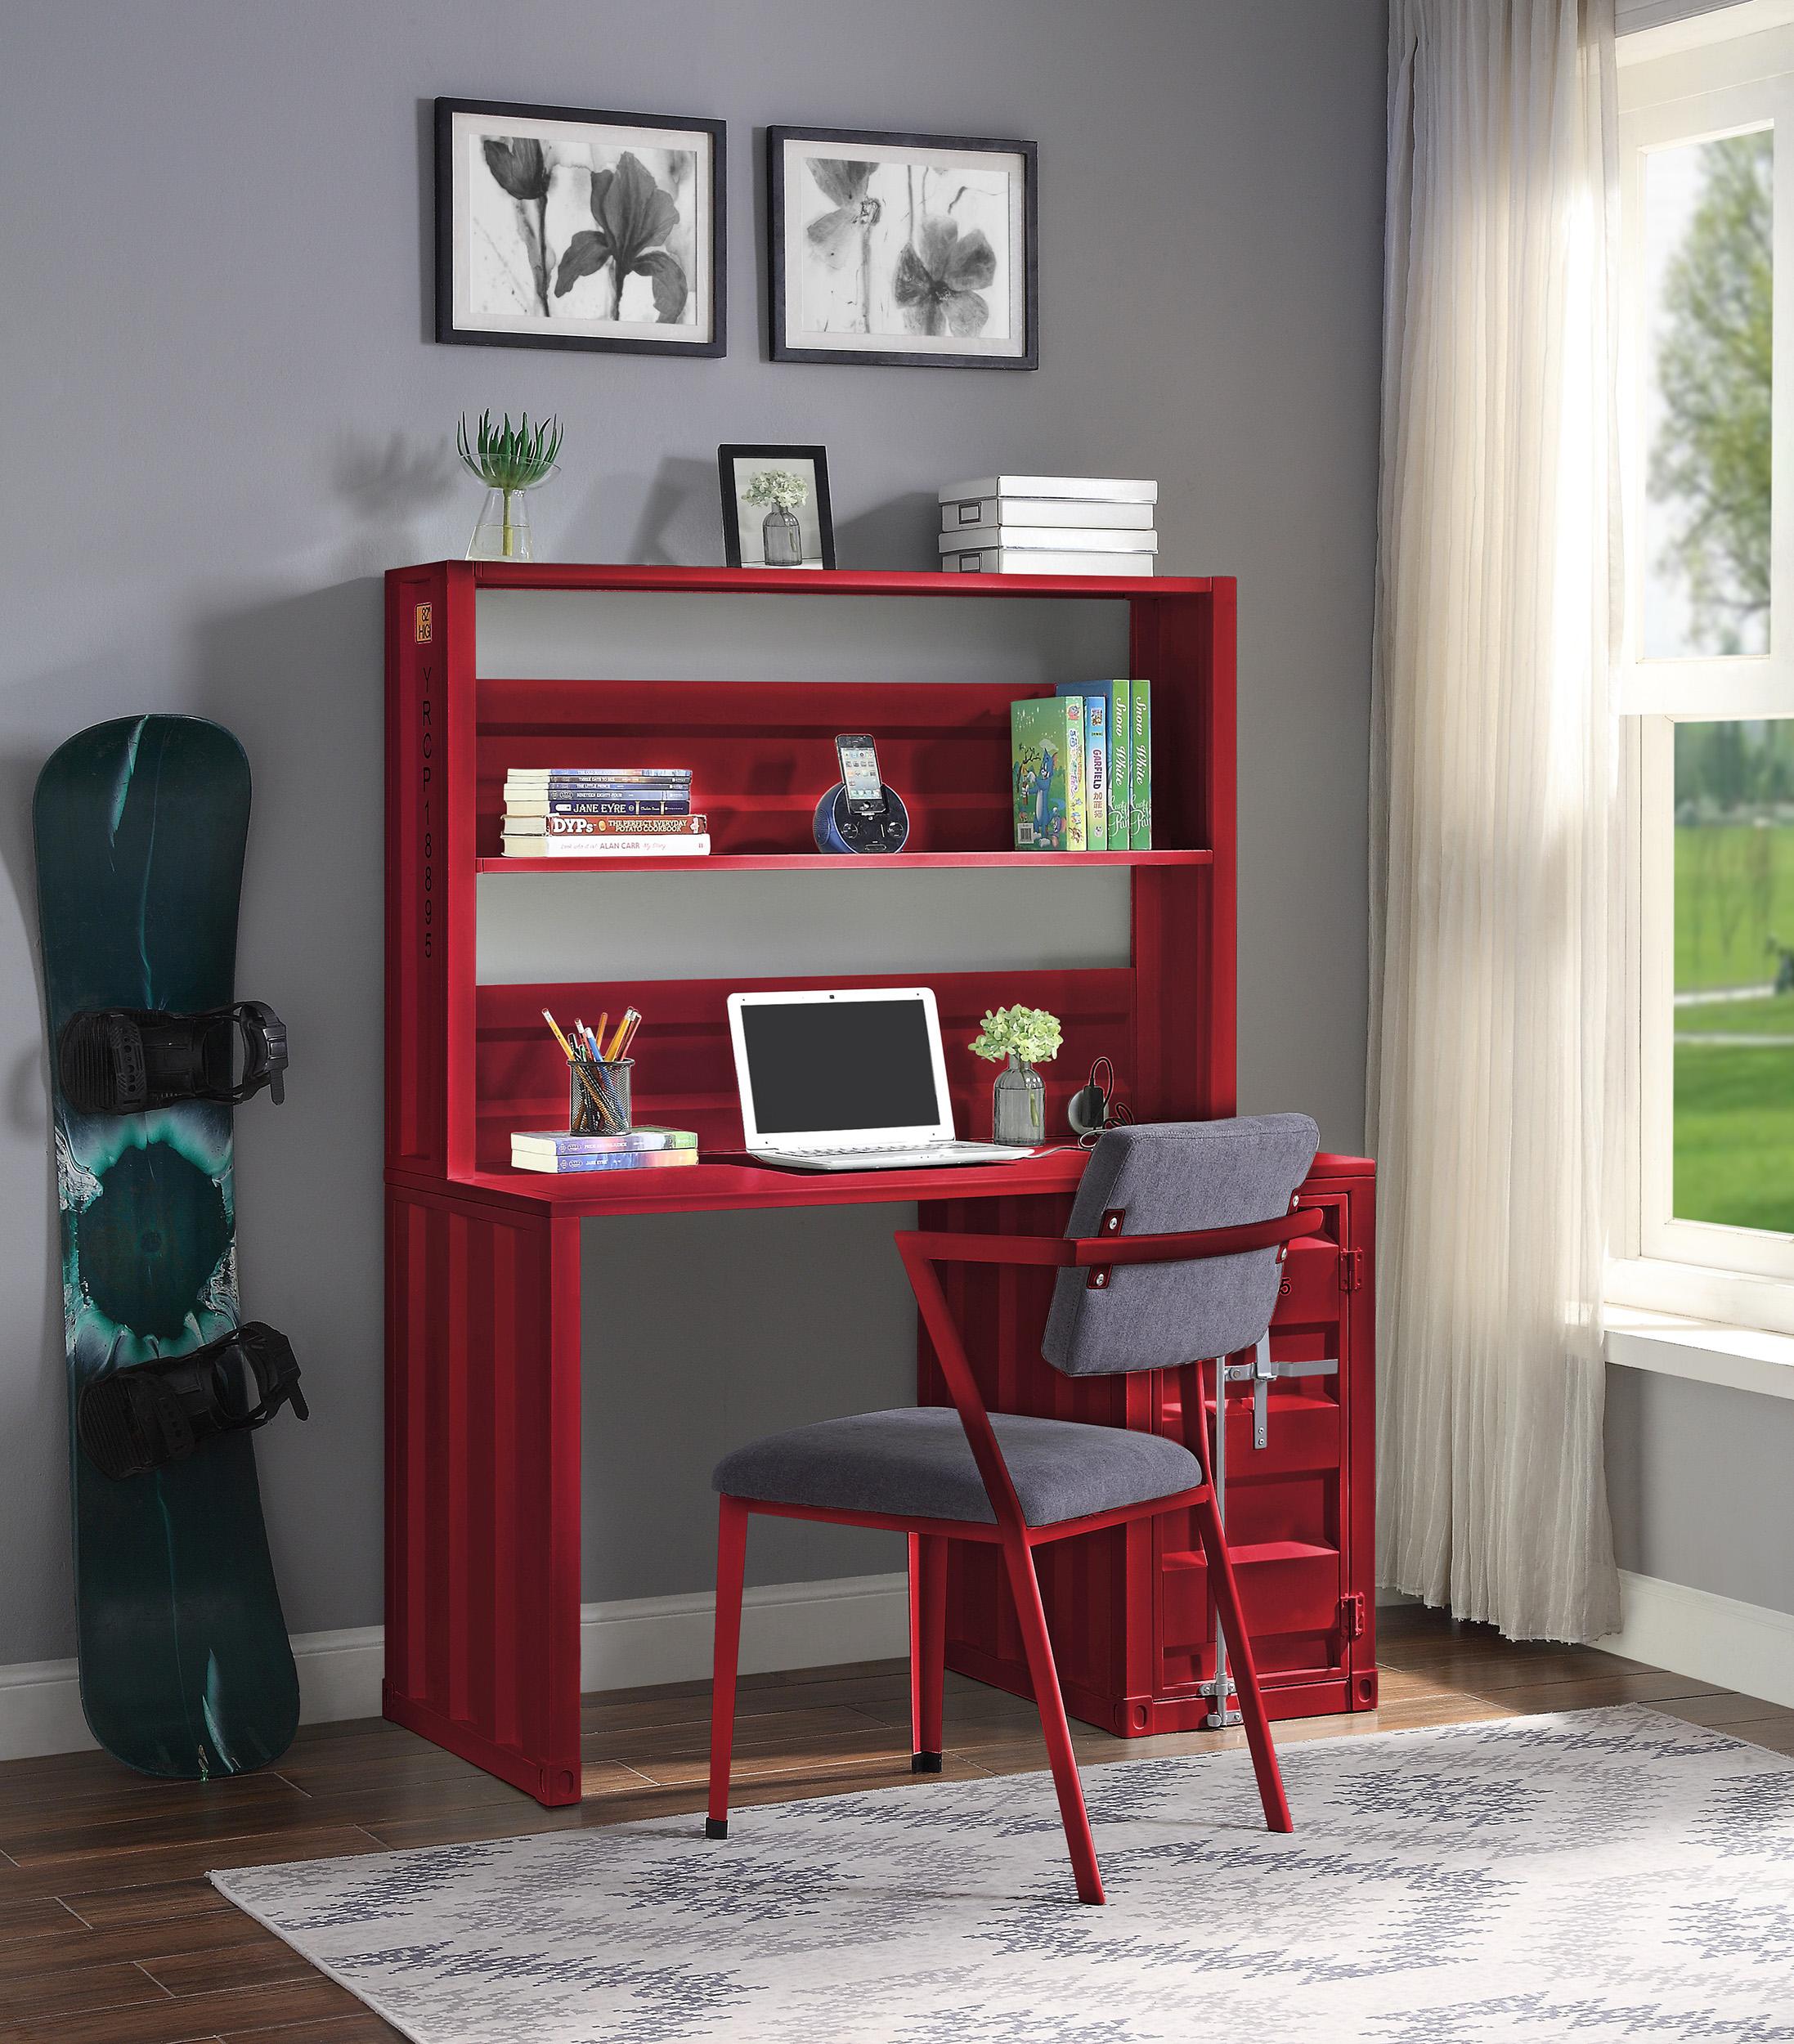 Contemporary, Modern Desk with Chair Cargo 37917-2pcs in Red Fabric